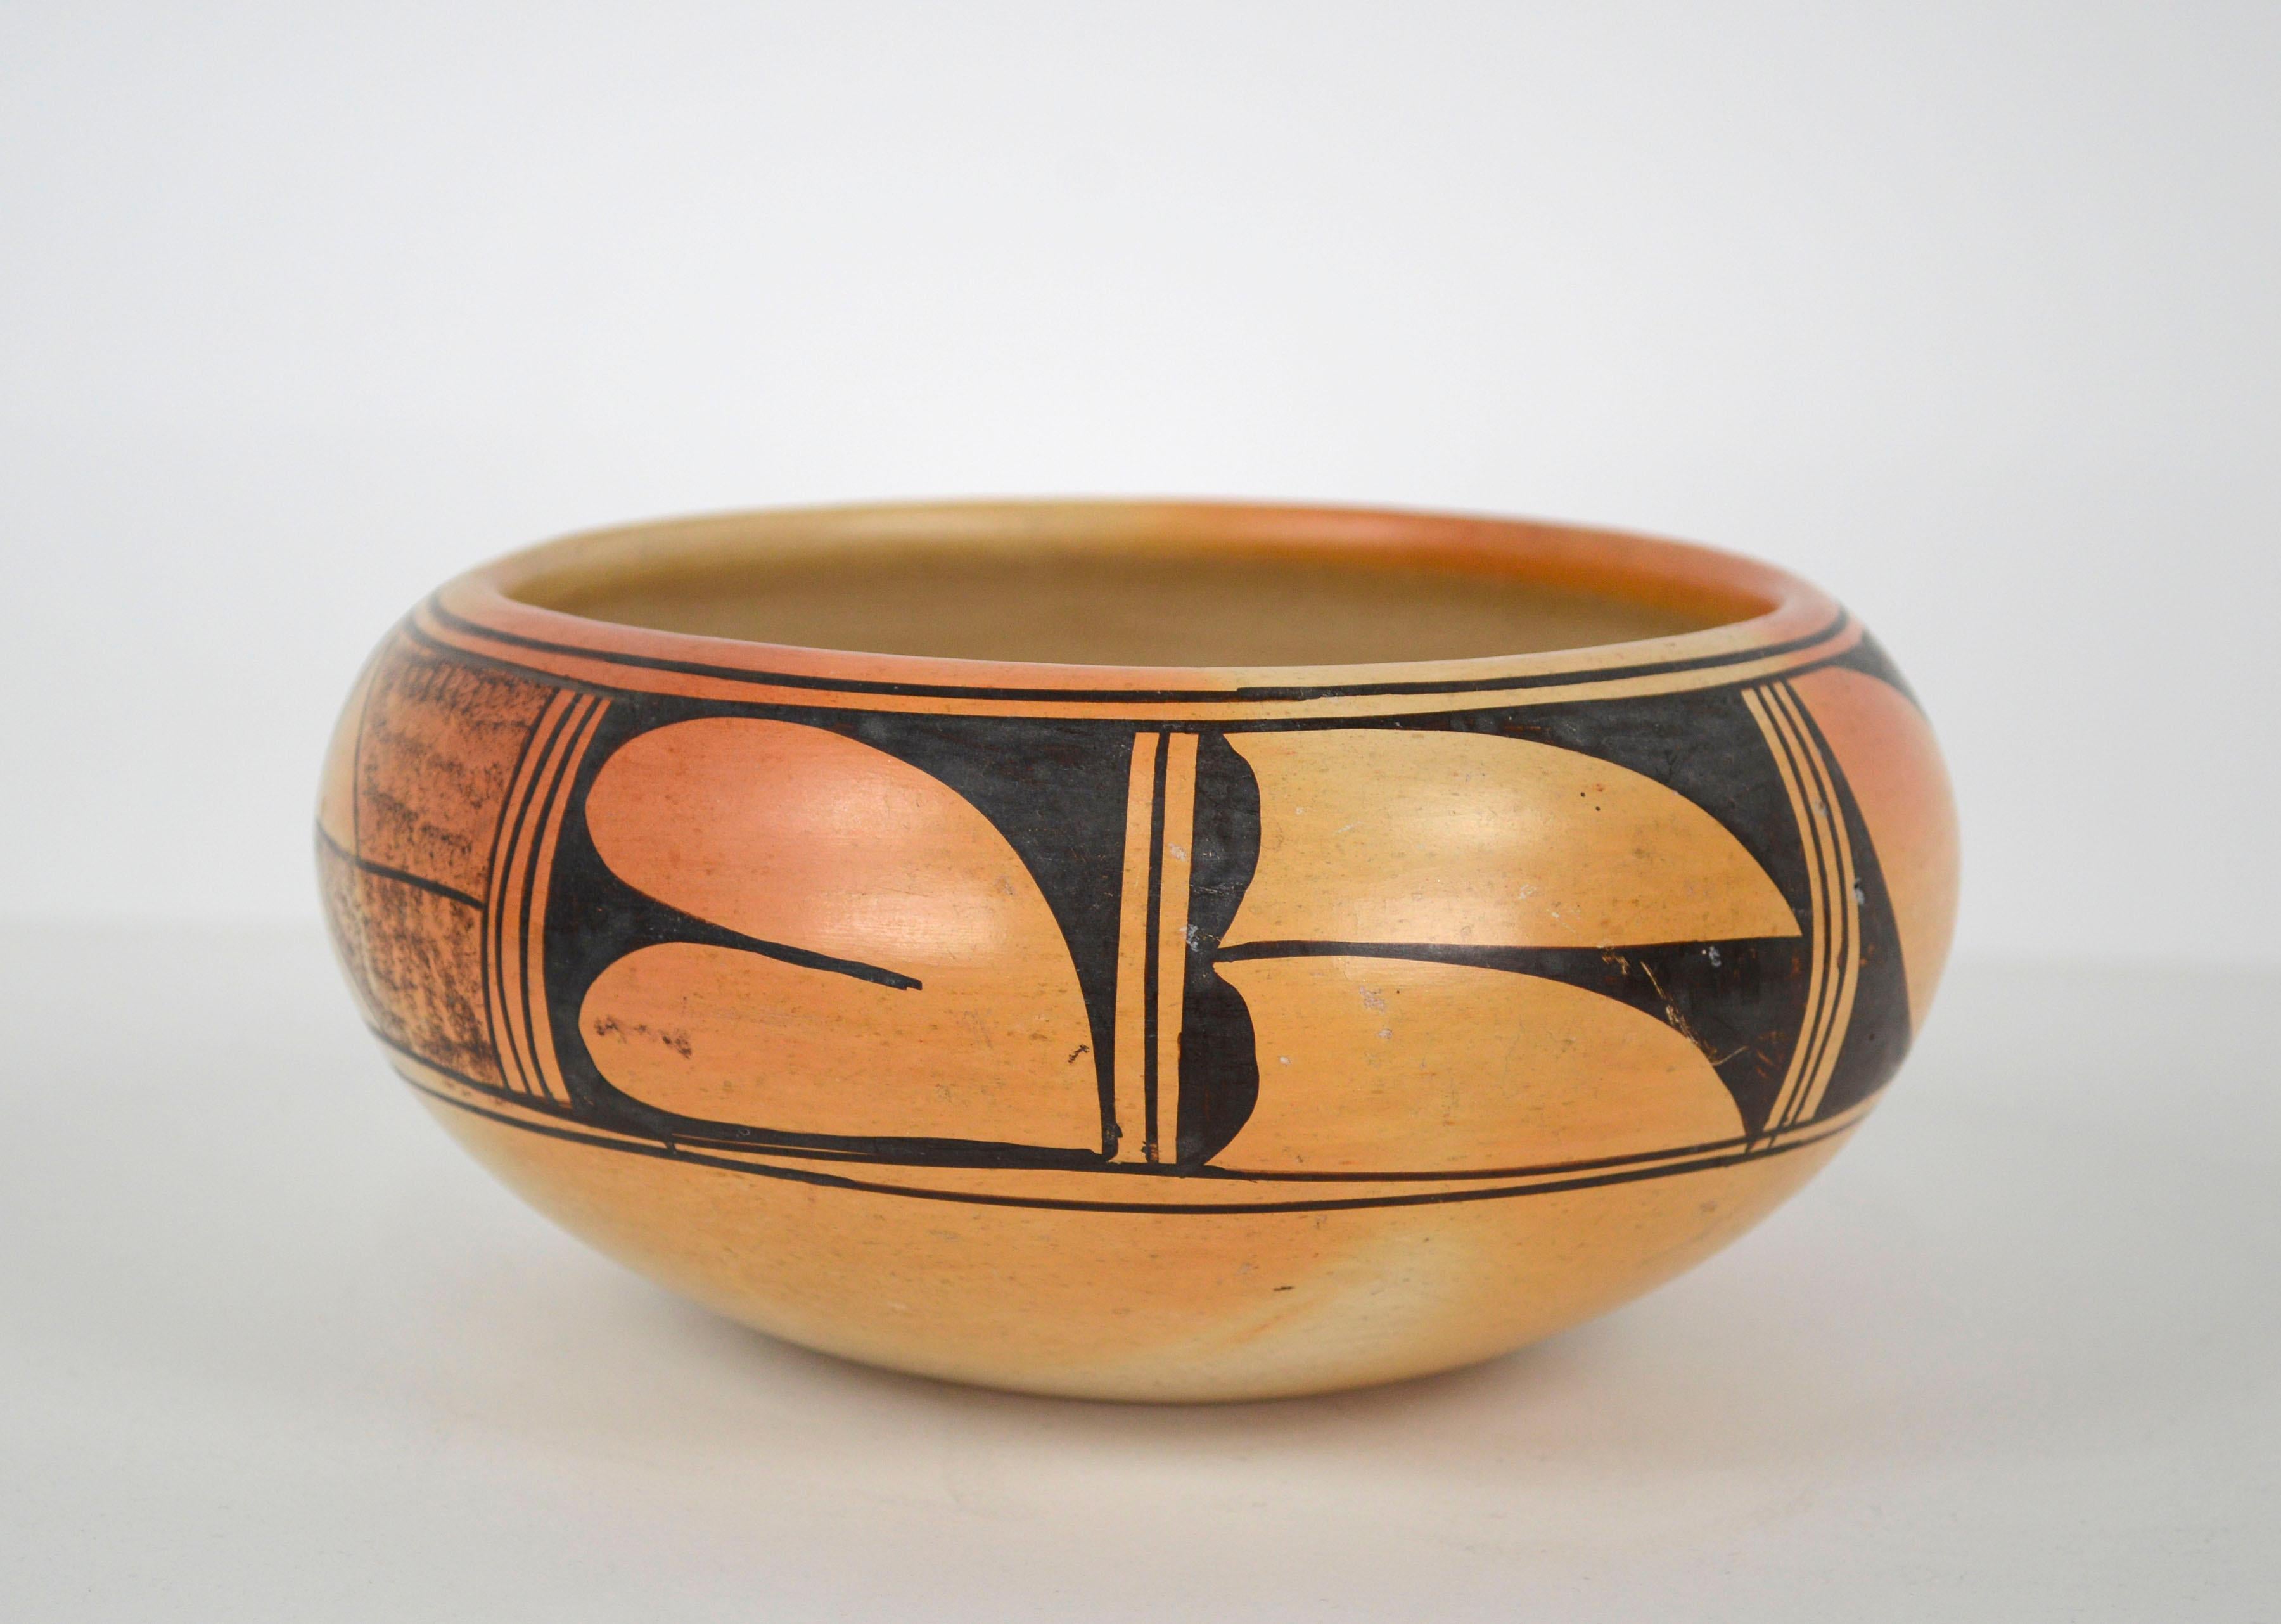 1930s Hopi/Tewa Black on Yellow Polychrome Pottery Bowl - Signed  - Art by Laura Chapella Tomosie